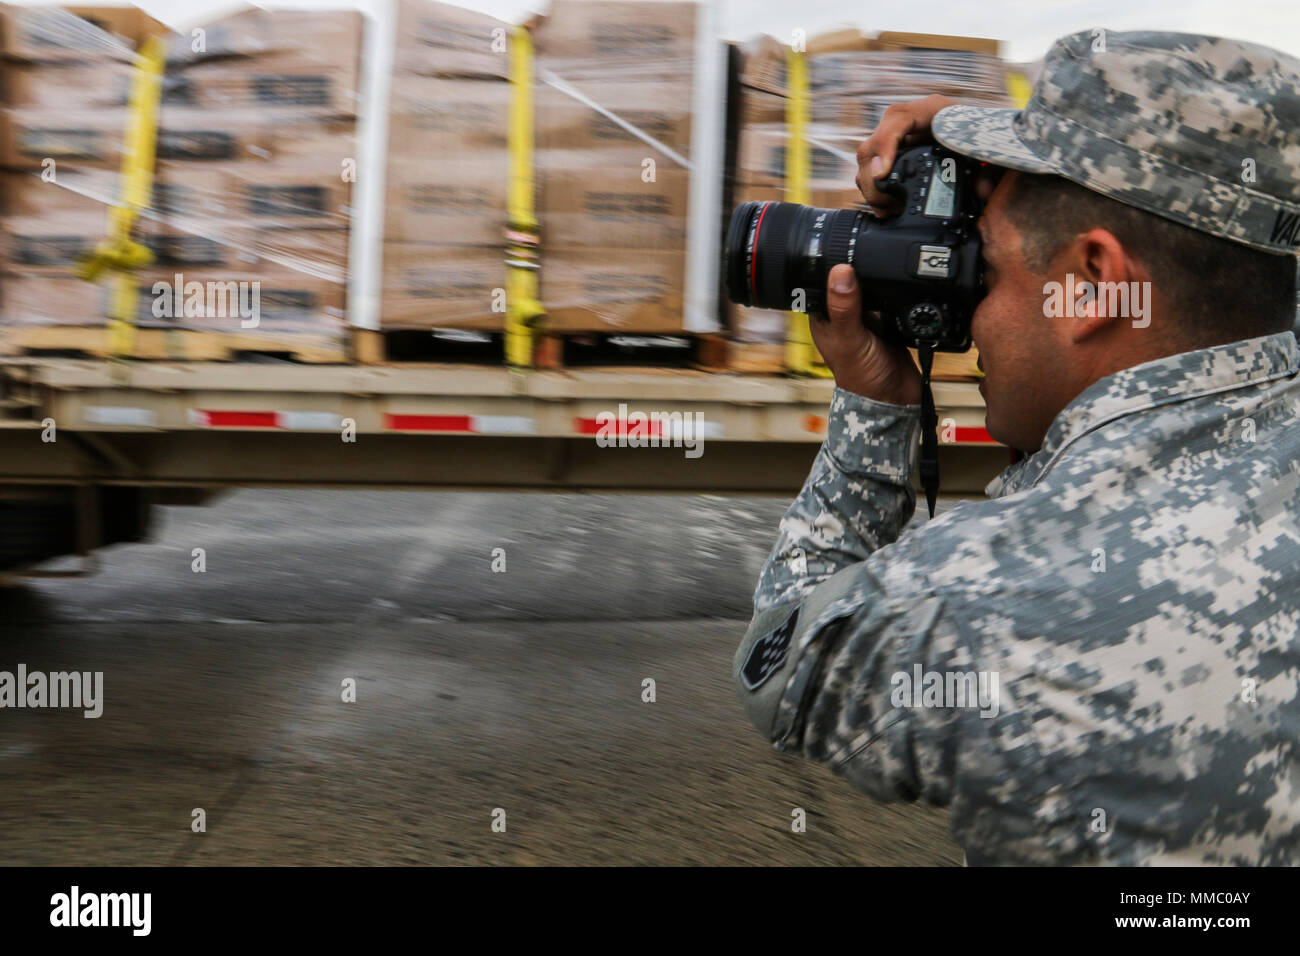 U.S. Army Reserve soldier, Sgt. Edgar Valdez, 220th Public Affairs Detachment, takes photos during a food delivery mission, that is part of Hurricane Maria relief efforts, outside of San Juan, Puerto Rico on Oct. 6, 2017. Valdez is part of a public affairs team that has spent the past several days working with Army Reserve soldiers, under the guidance and request of civil authorities, who are providing much needed supplies and resources to all of Puerto Rico. America’s Army Reserve can provide logistical, medical, and engineering support within hours of a disaster. Valdez is a public affairs p Stock Photo